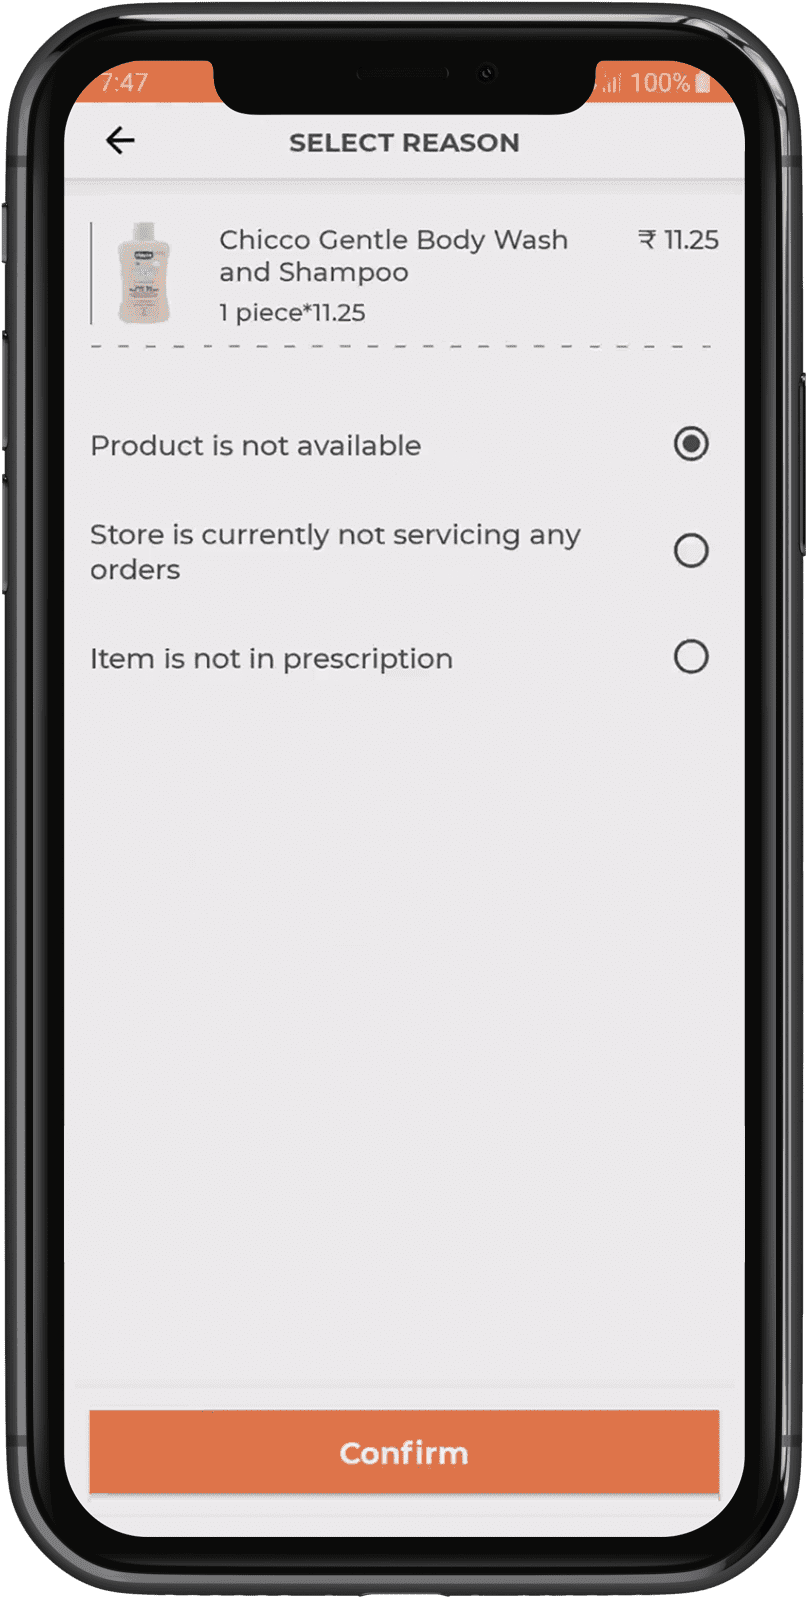 option-to-reject-any-single-item-from-the-order-in-medicine-delivery-picker-app.png